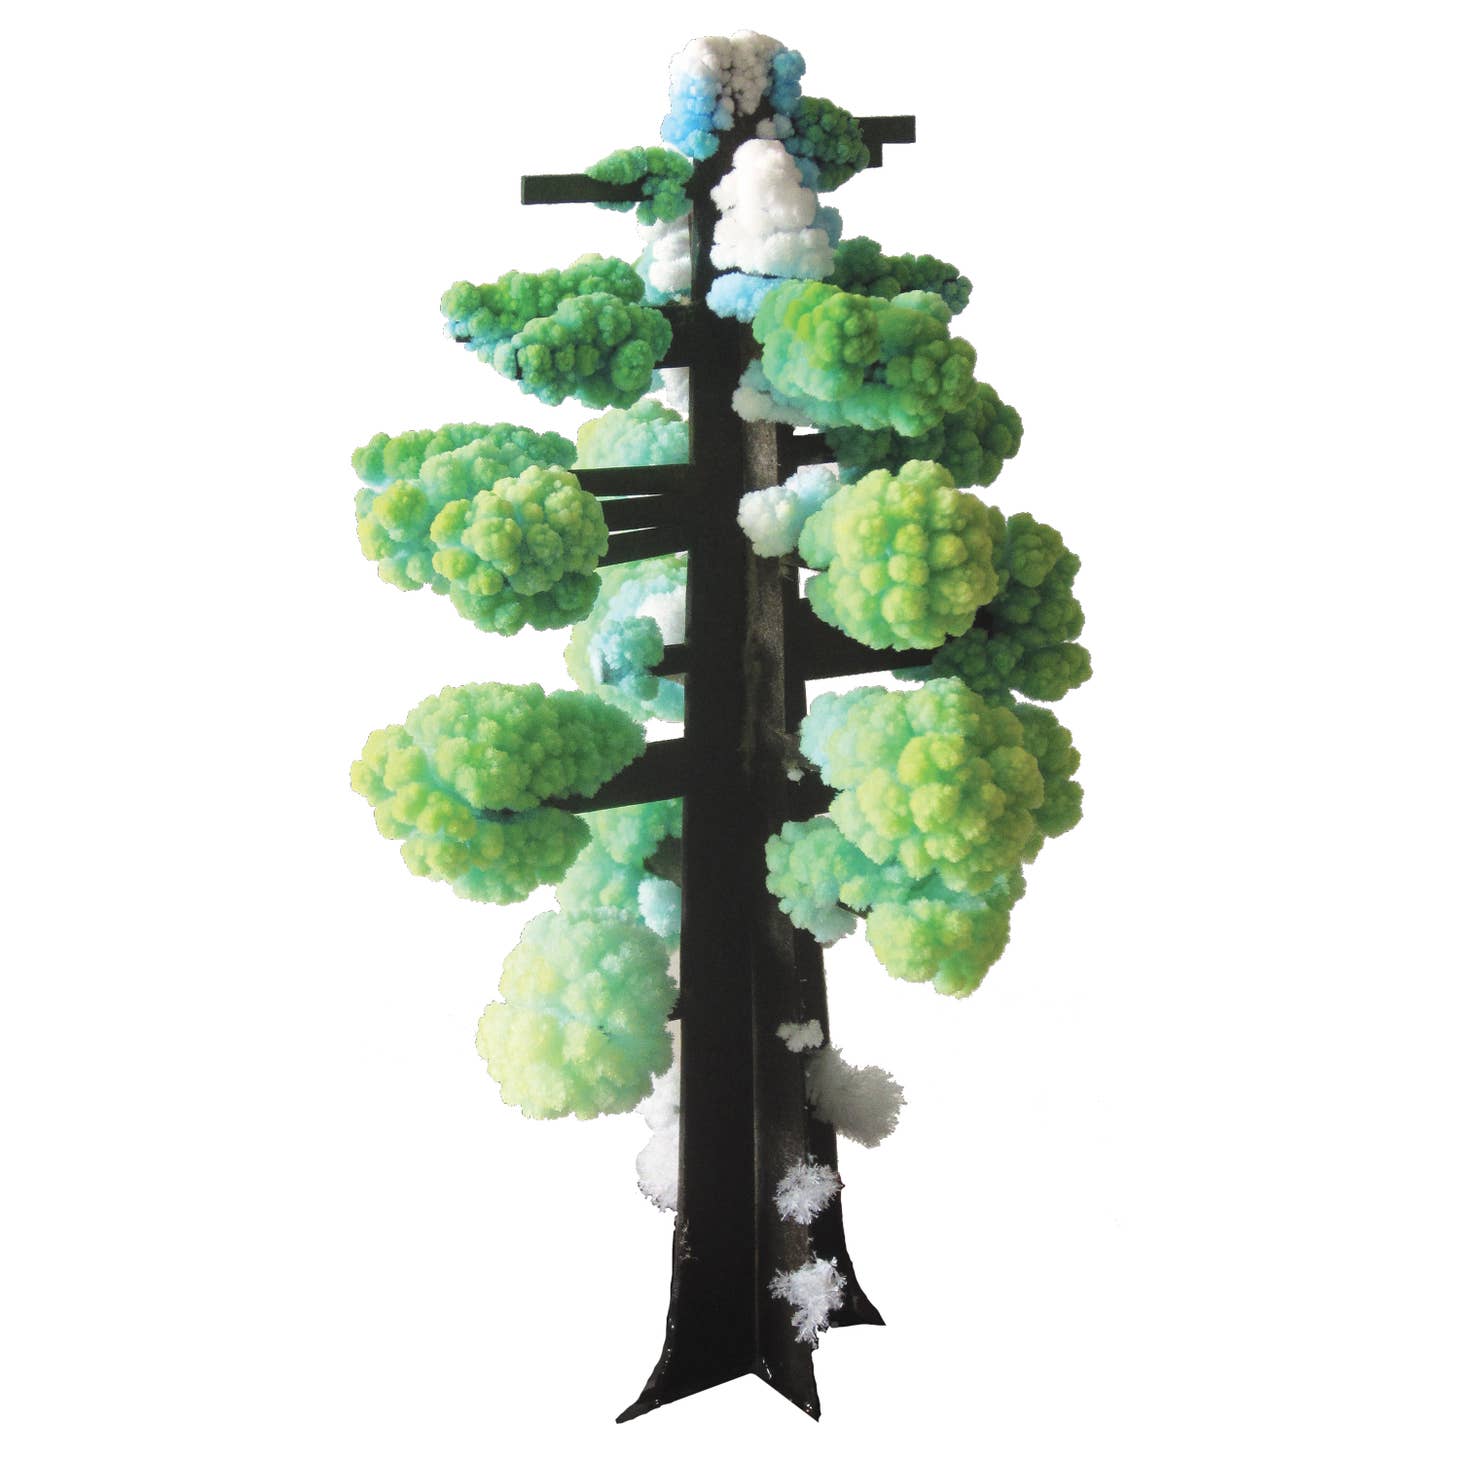 Create your own Balsam Fir or Giant Sequoia! Each kit comes with terraforming solution and instructions to create your own little miniature tree using micro crystal technology.